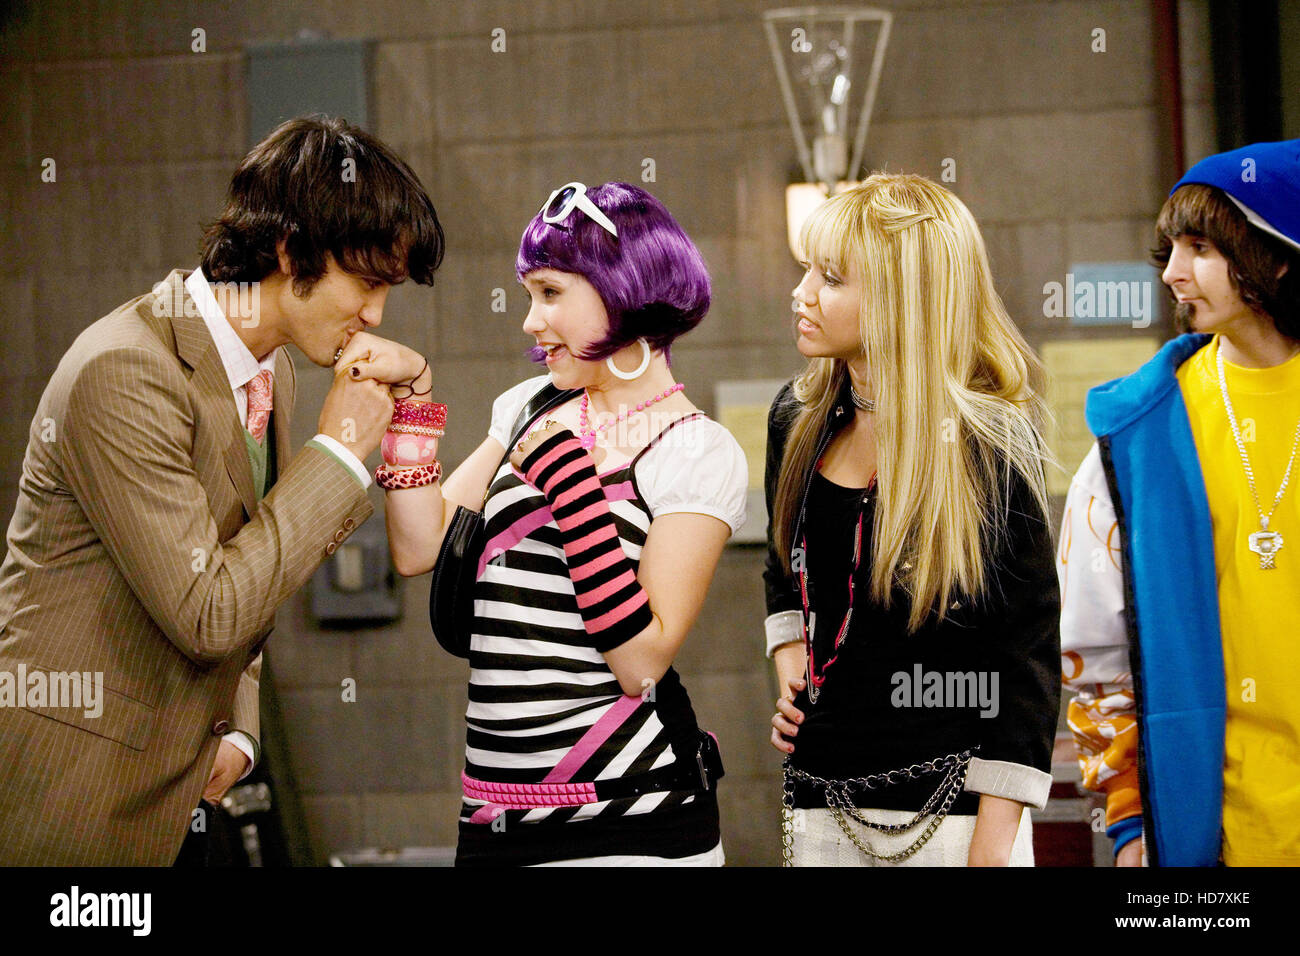 HANNAH MONTANA, Michael Steger, Emily Osment, Miley Cyrus, Mitchel Musso, 'Everybody Was Best Friend Fighting', (Season 2, Stock Photo